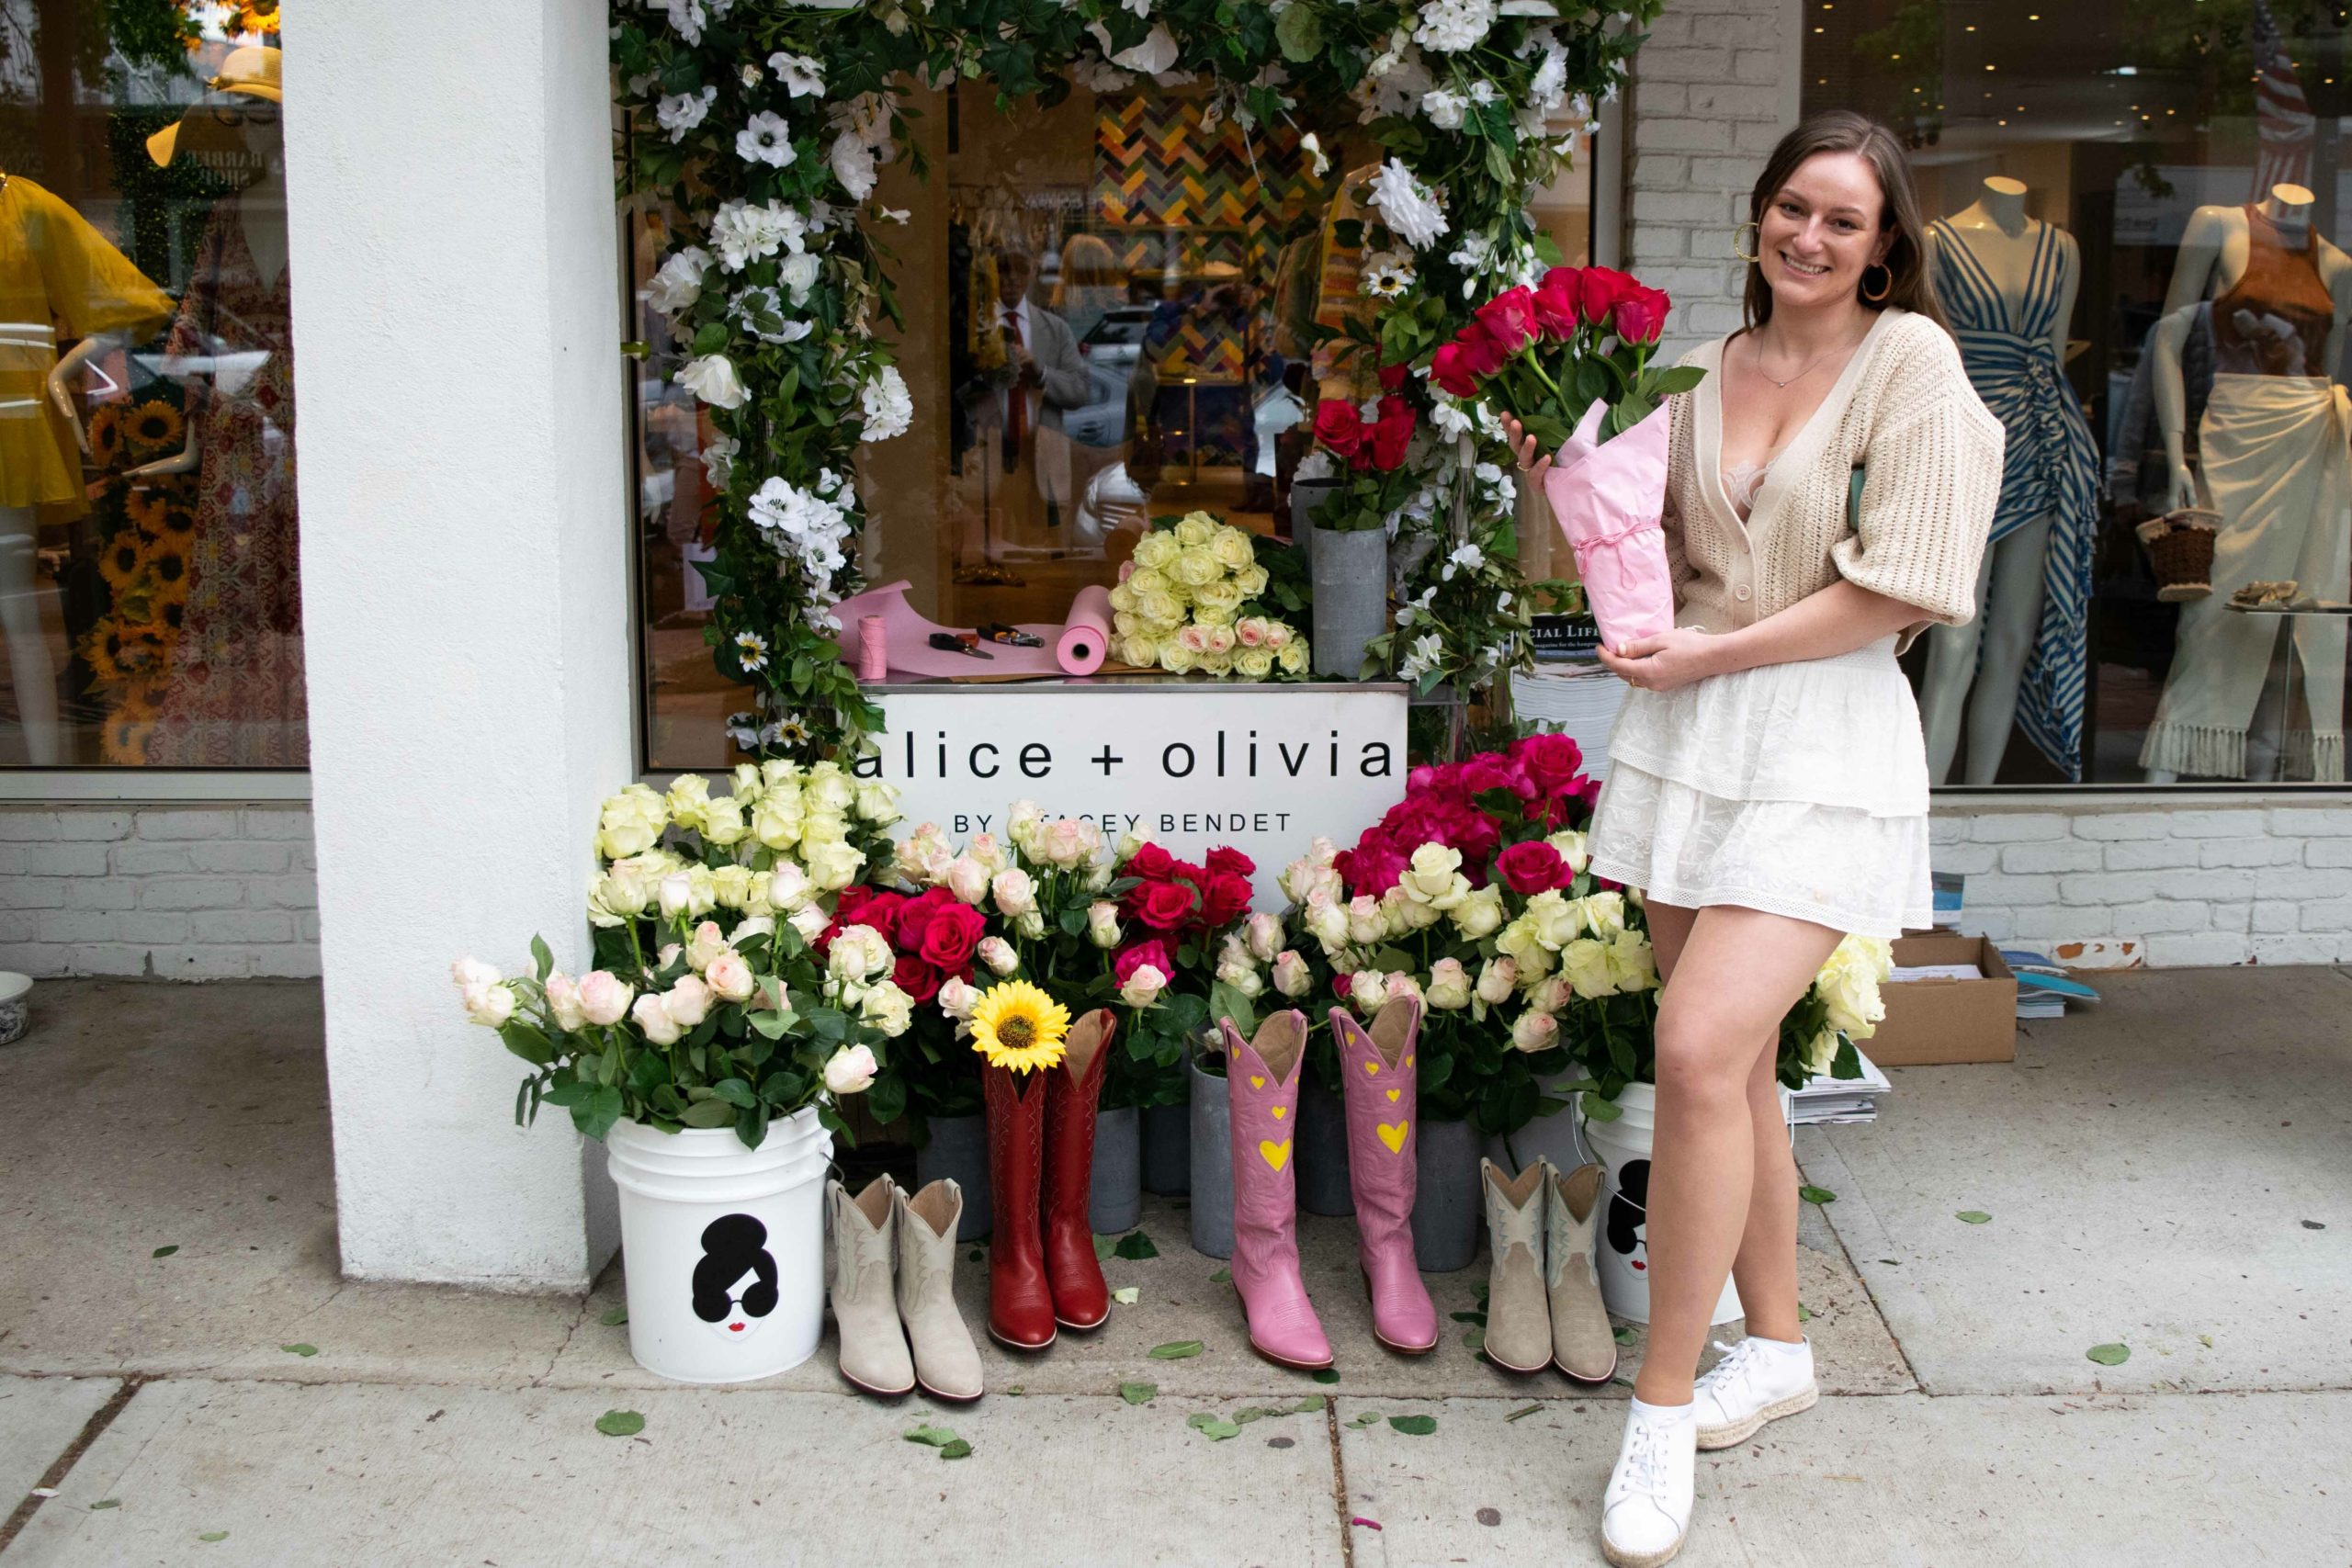 Alice & Olivia took first place at the first annual Southampton Rose Day event held earlier this month in celebration of the village flower, the rose.